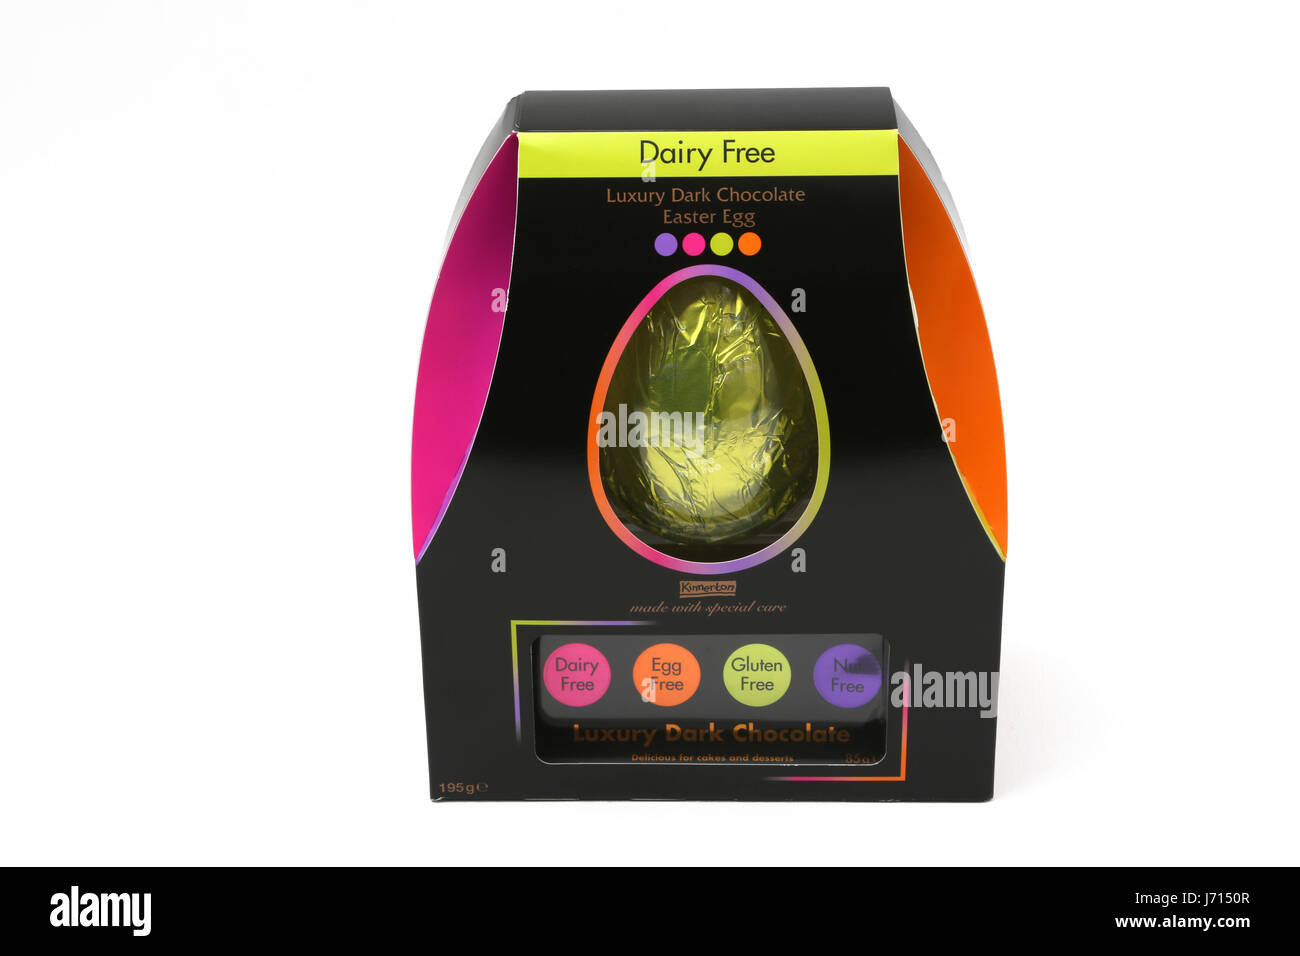 Kinnerton Dark Chocolate Easter Egg Free from Dairy, Egg, Gluten and Nuts Stock Photo